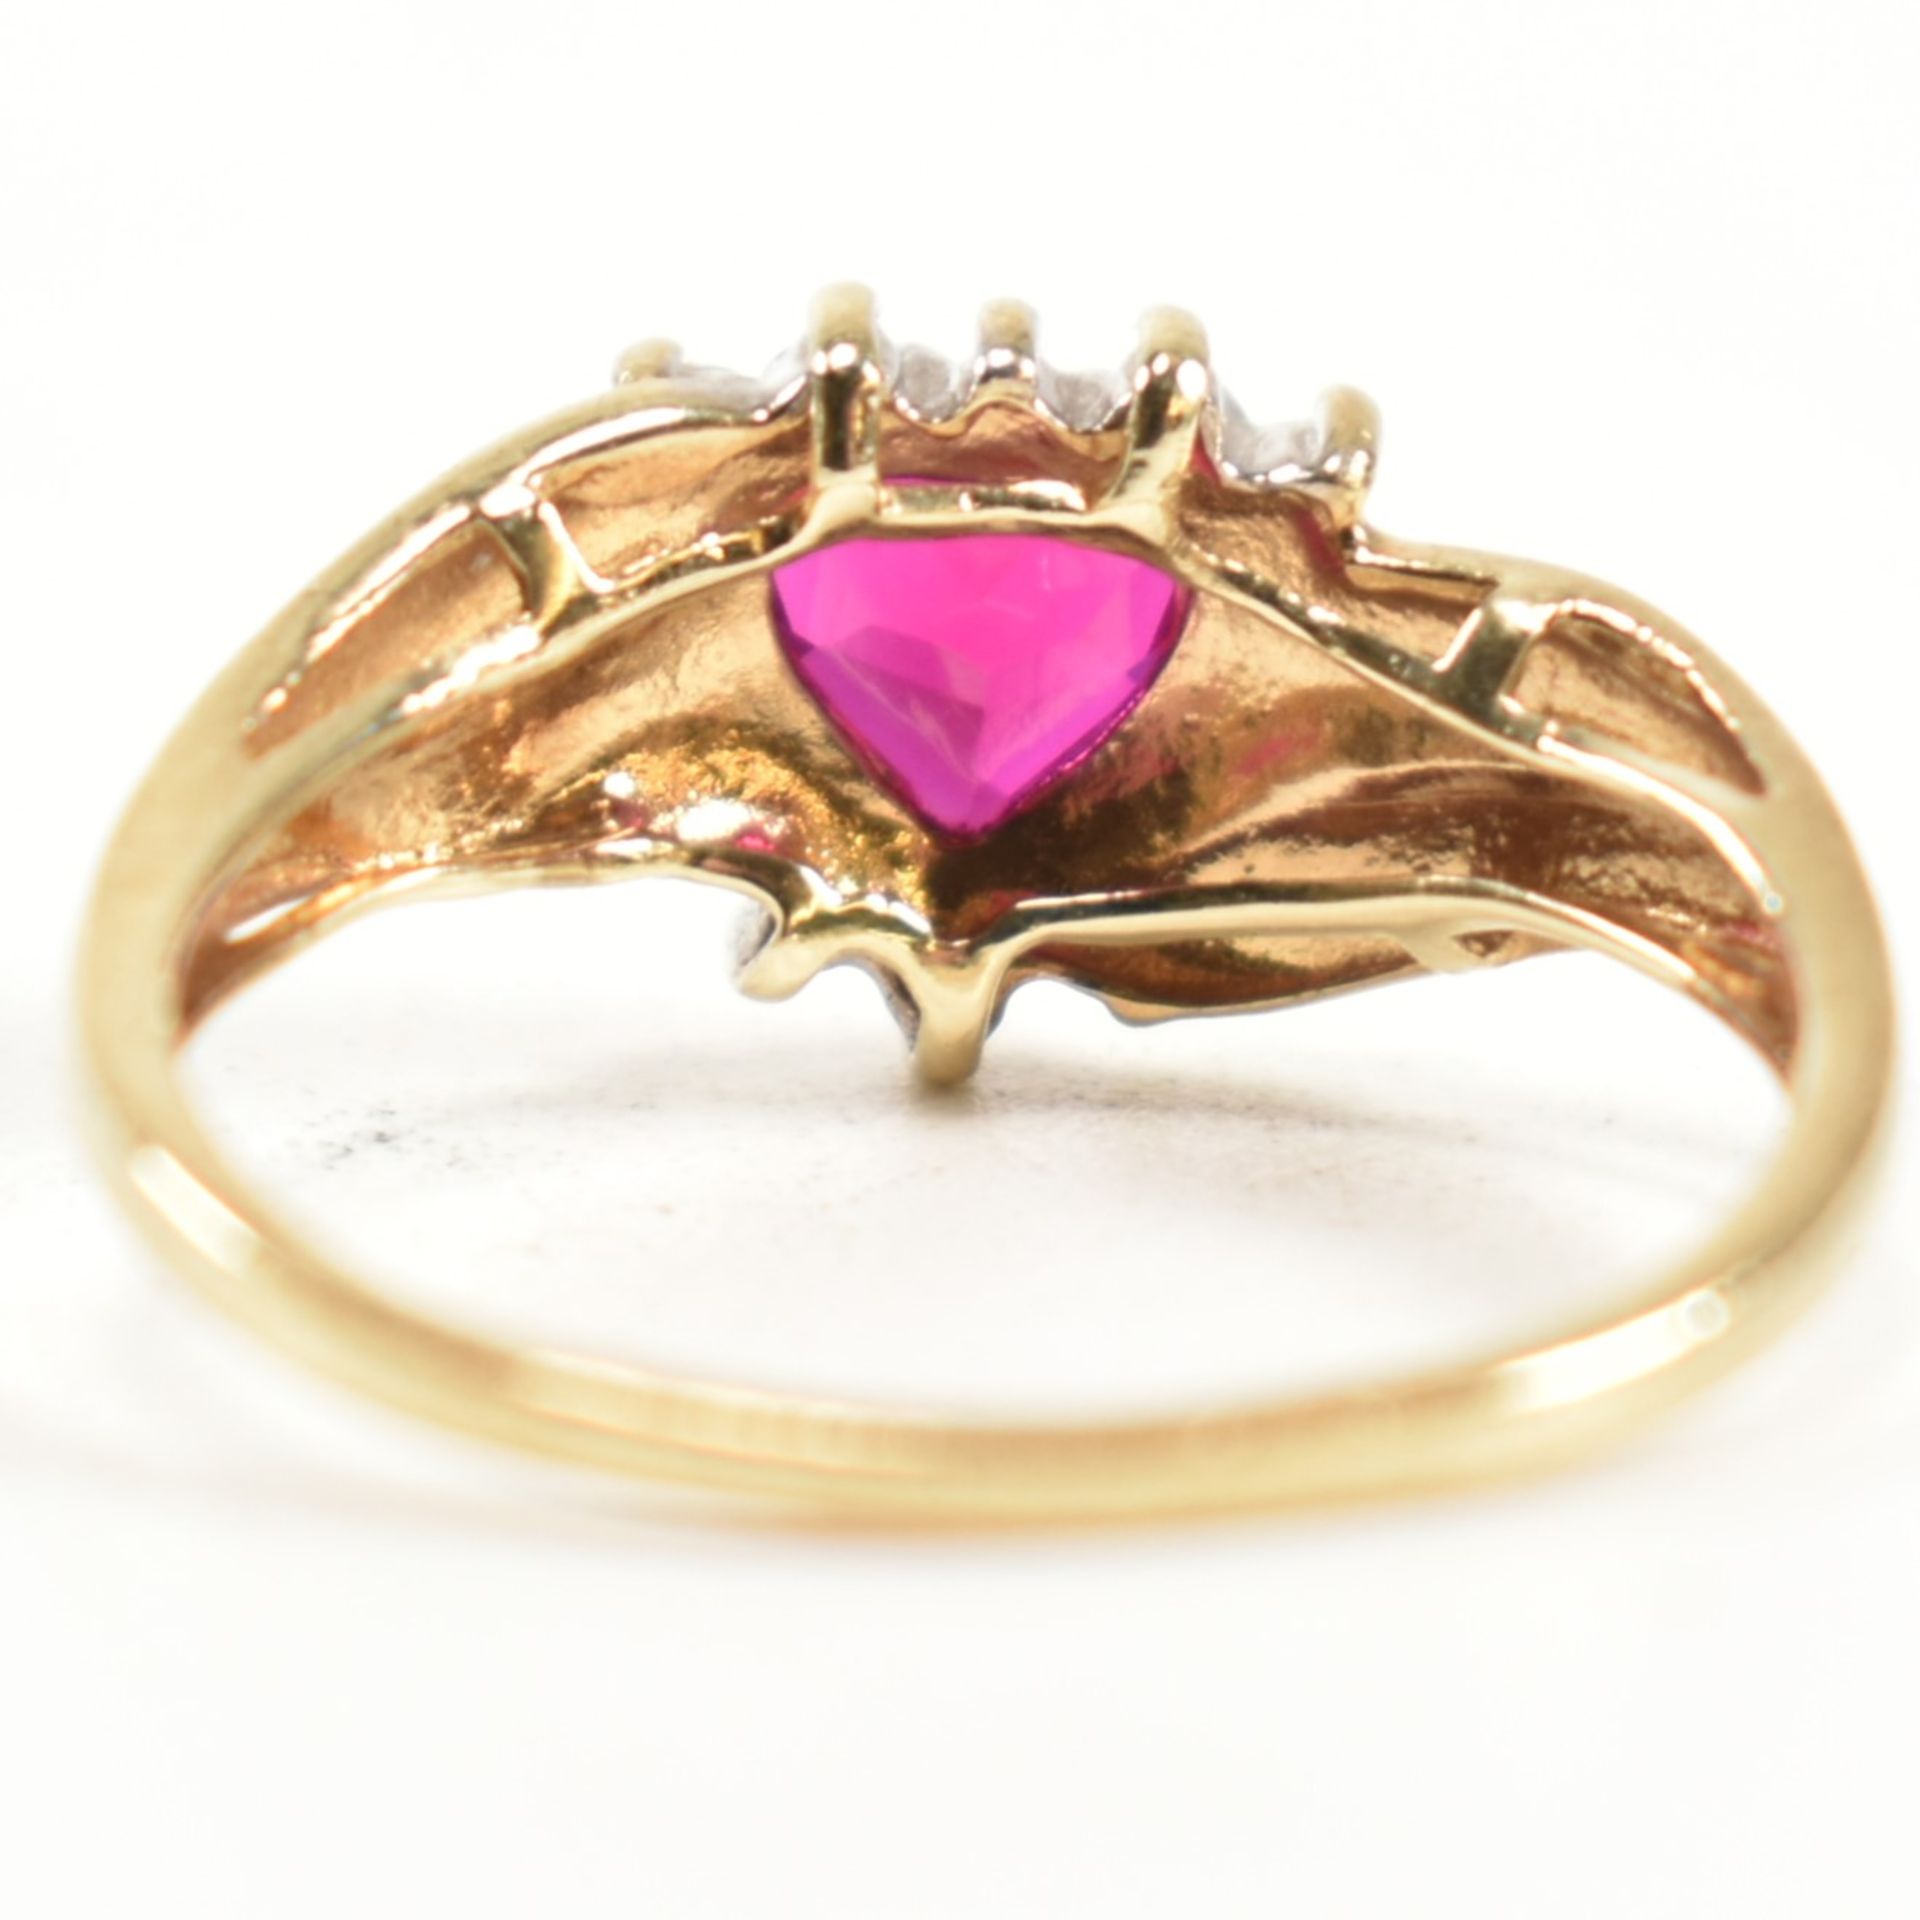 HALLMARKED 9CT GOLD DIAMOND & RUBY CLUSTER RING - Image 2 of 10